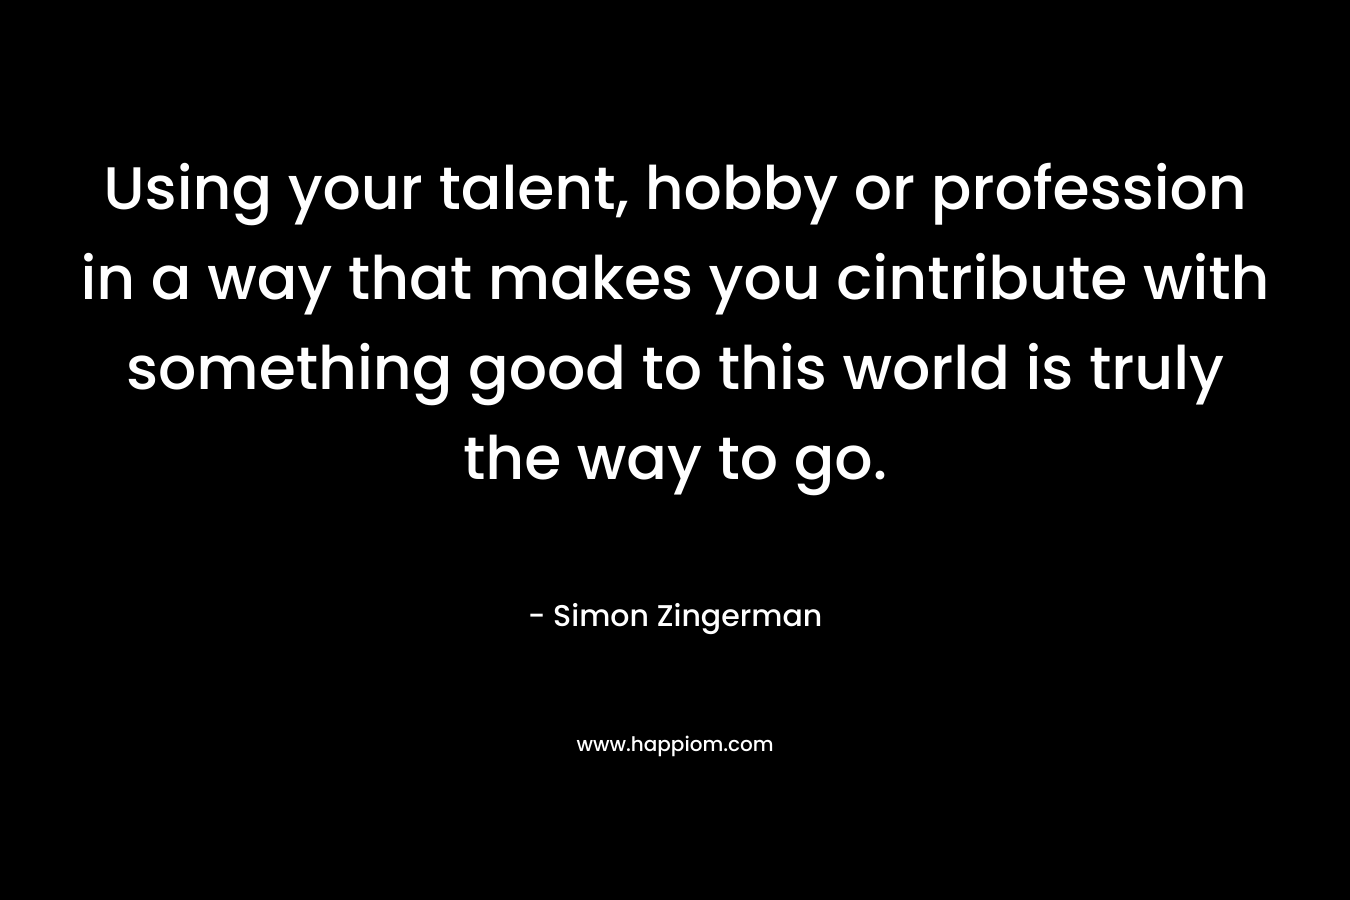 Using your talent, hobby or profession in a way that makes you cintribute with something good to this world is truly the way to go. – Simon Zingerman